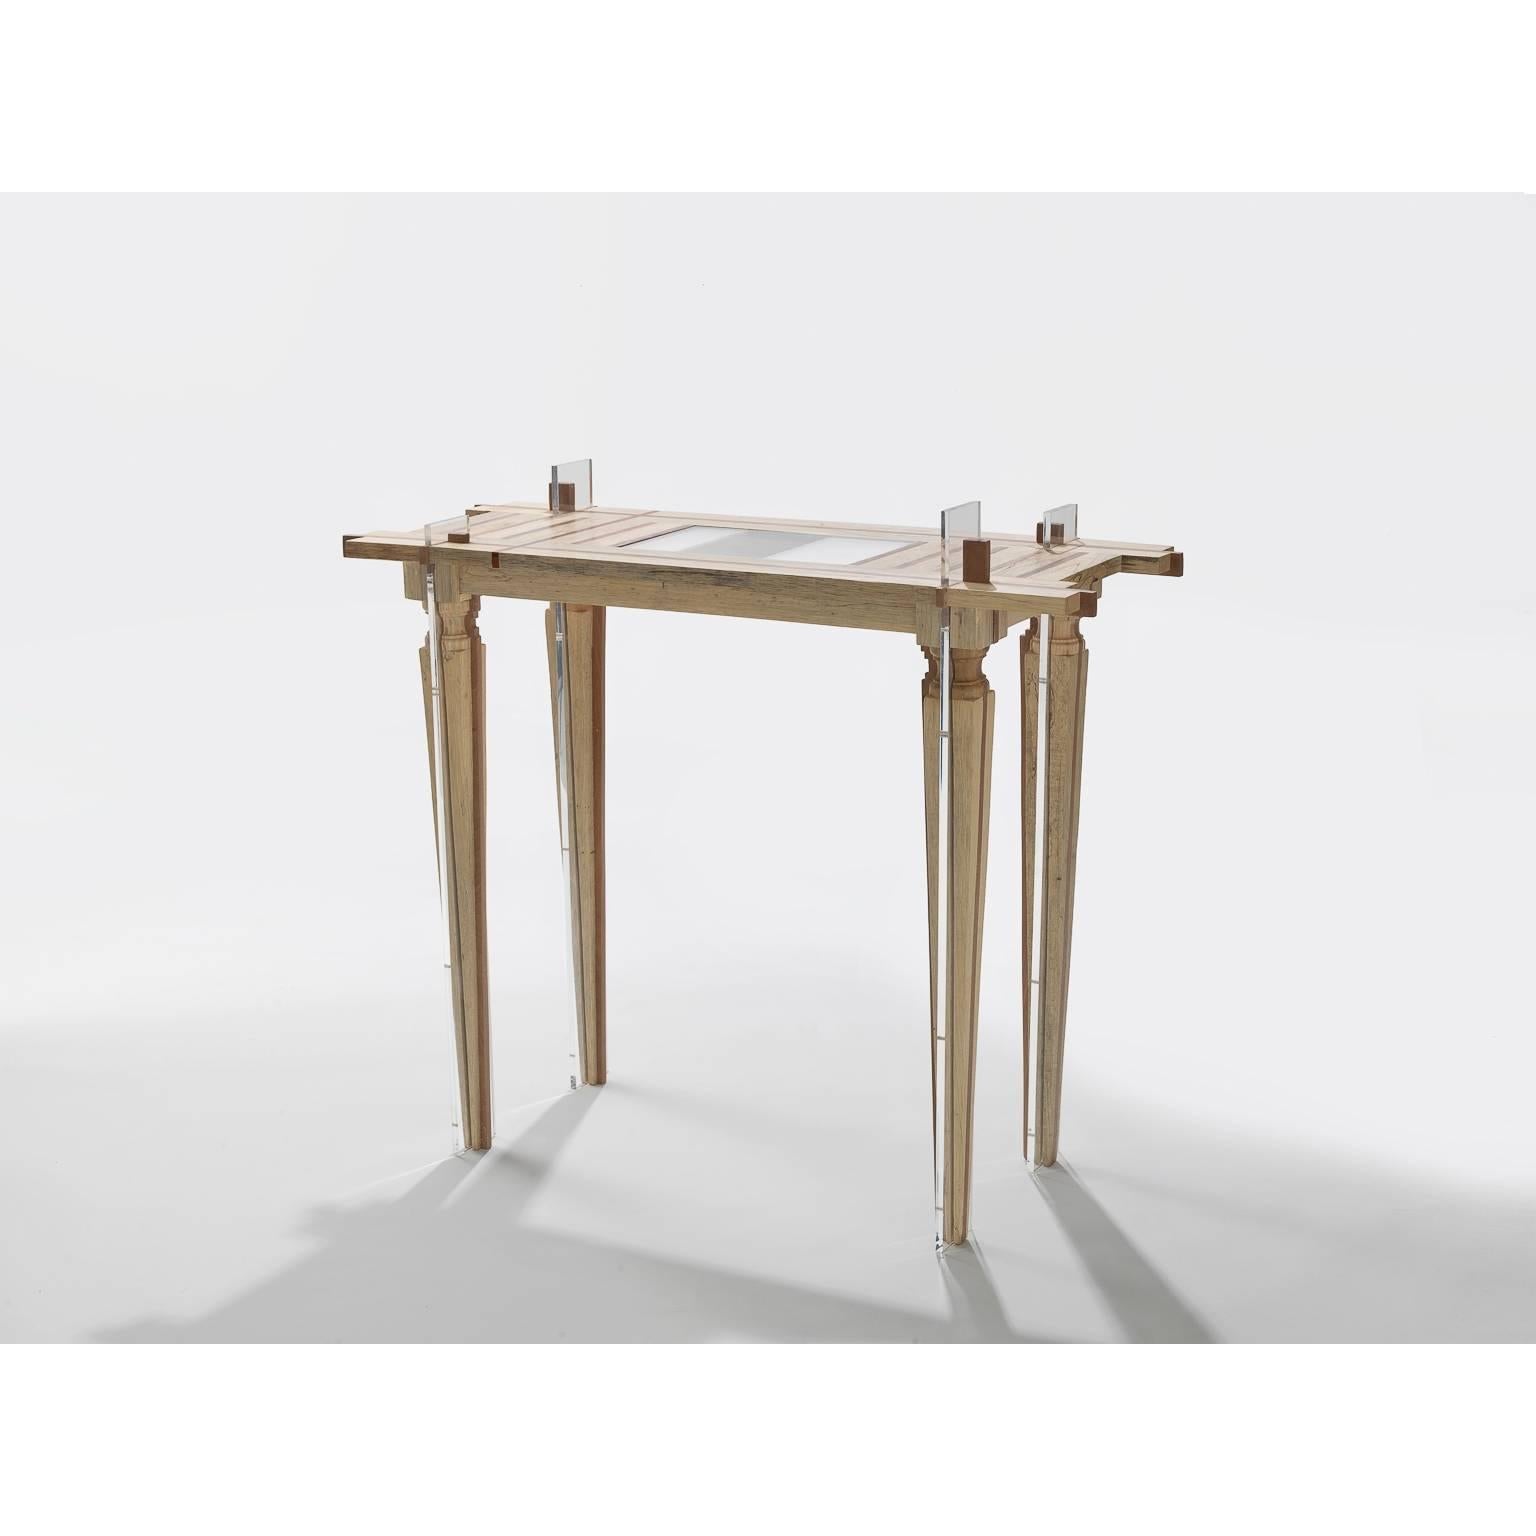 This contemporary console table is made of handcrafted Amazonian woods (Jequitiba and Cacheta muerta) and acrylic.

This piece is the result of artisanal production process, which makes it extremely unique. Therefore, any irregularities should not